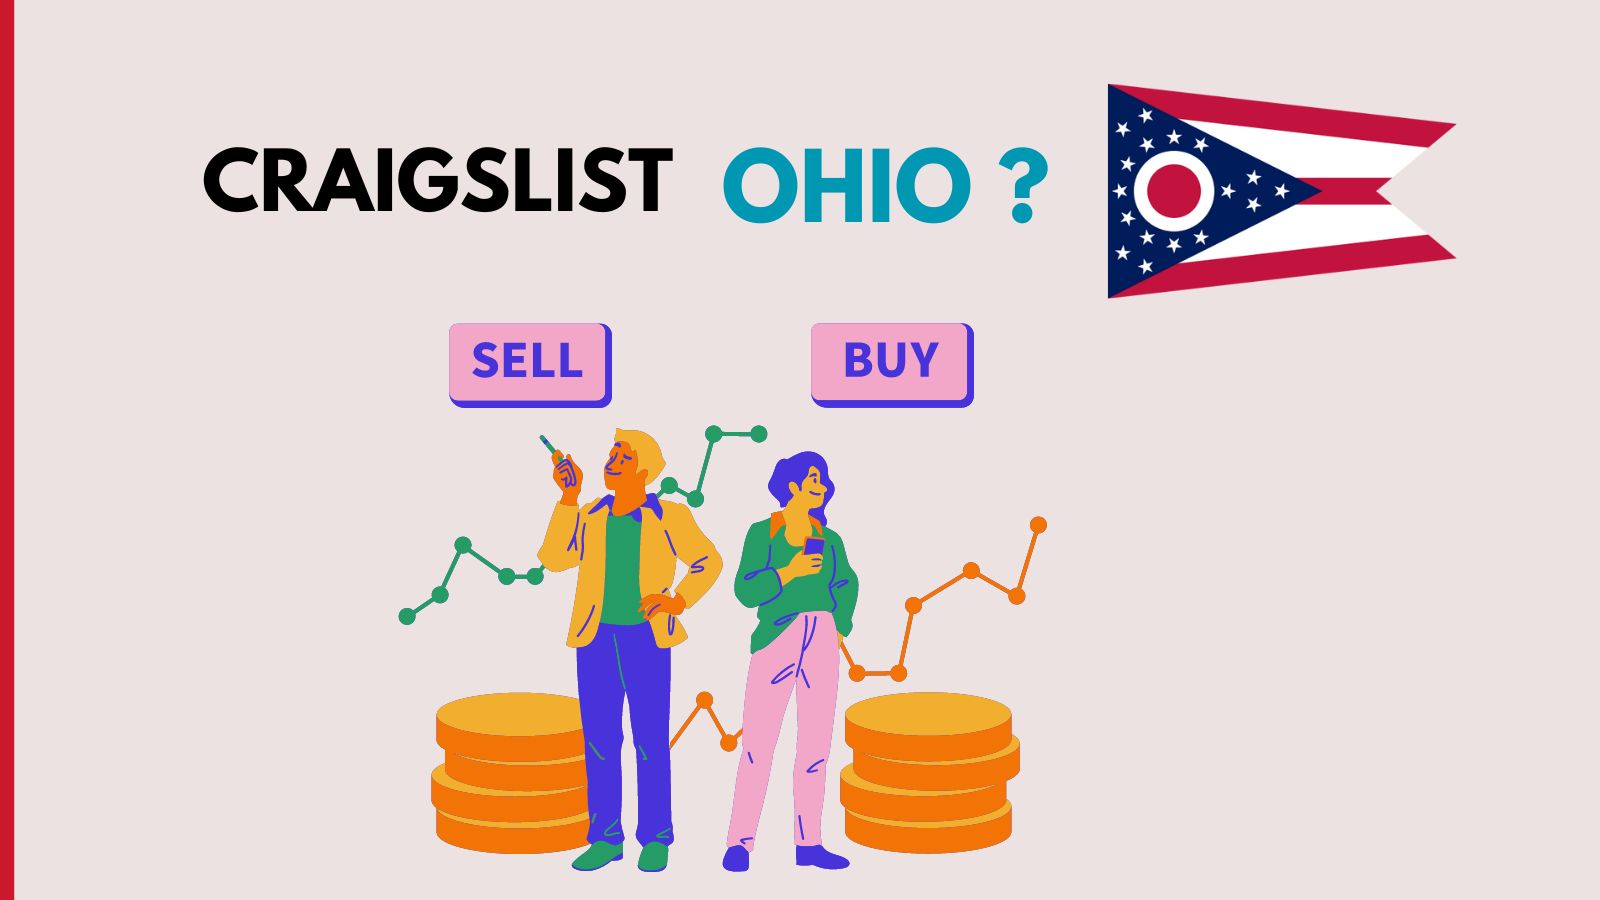 How to Sell and Buy an Item on Craigslist Ohio